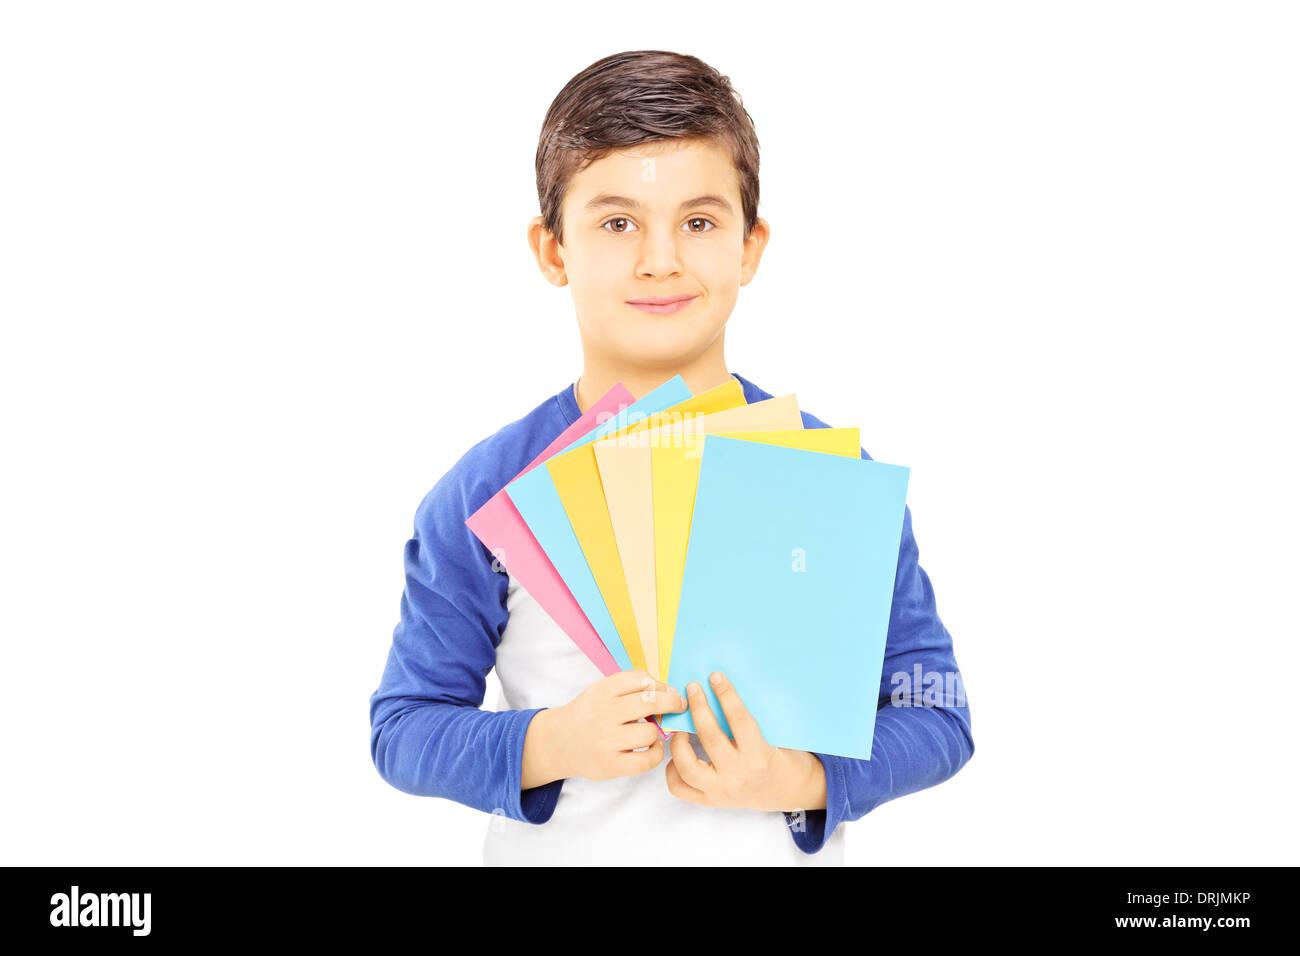 Boy holding cards in different colors and looking at camera Stock Photo